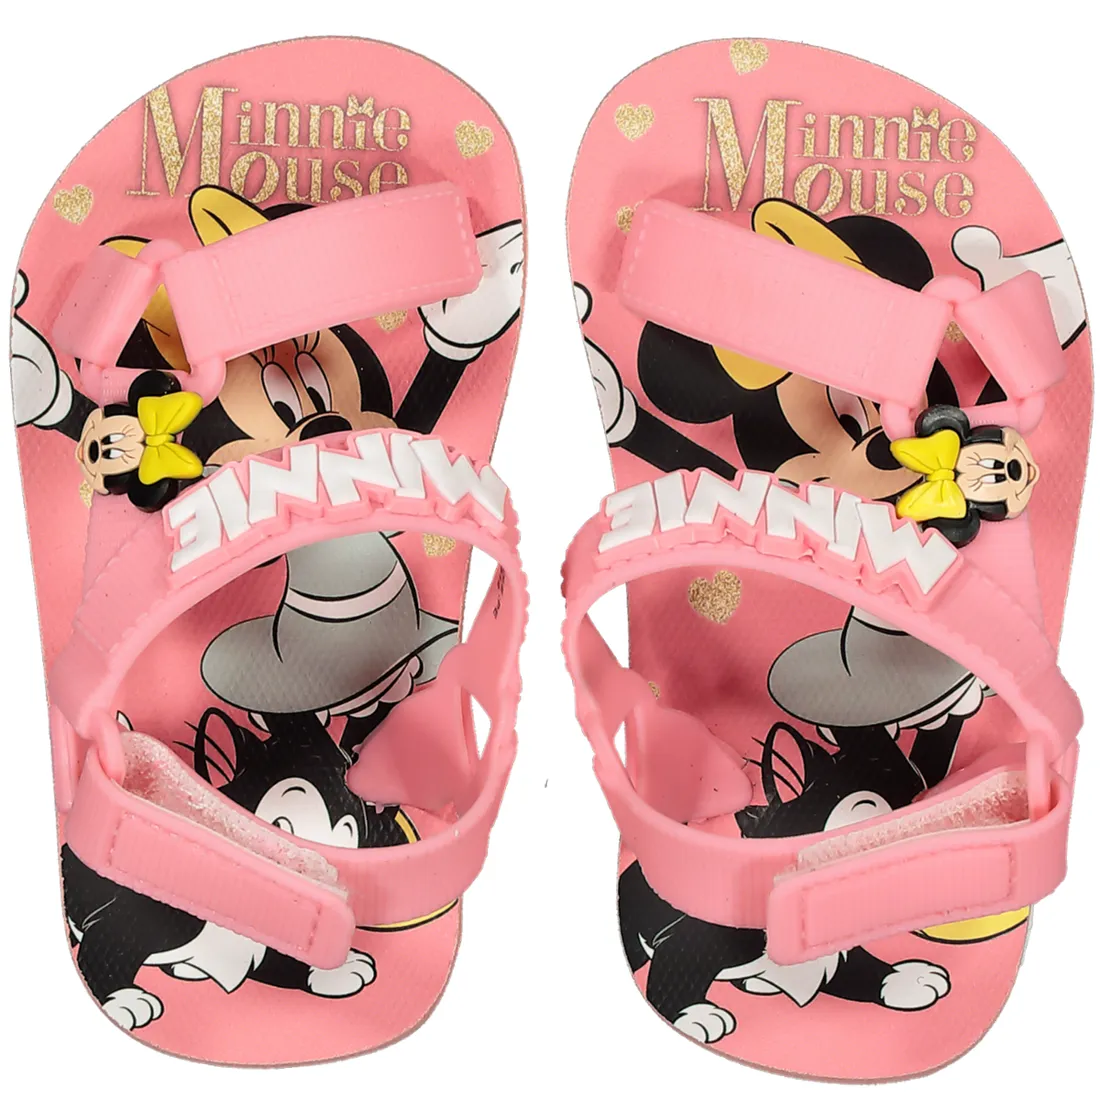 Disney Girls' Sandals - Minnie Mouse Thong Flip Flops with Heel Strap  (Toddler/Little Kid), Size 9/10, Minnie Mouse price in UAE,  UAE